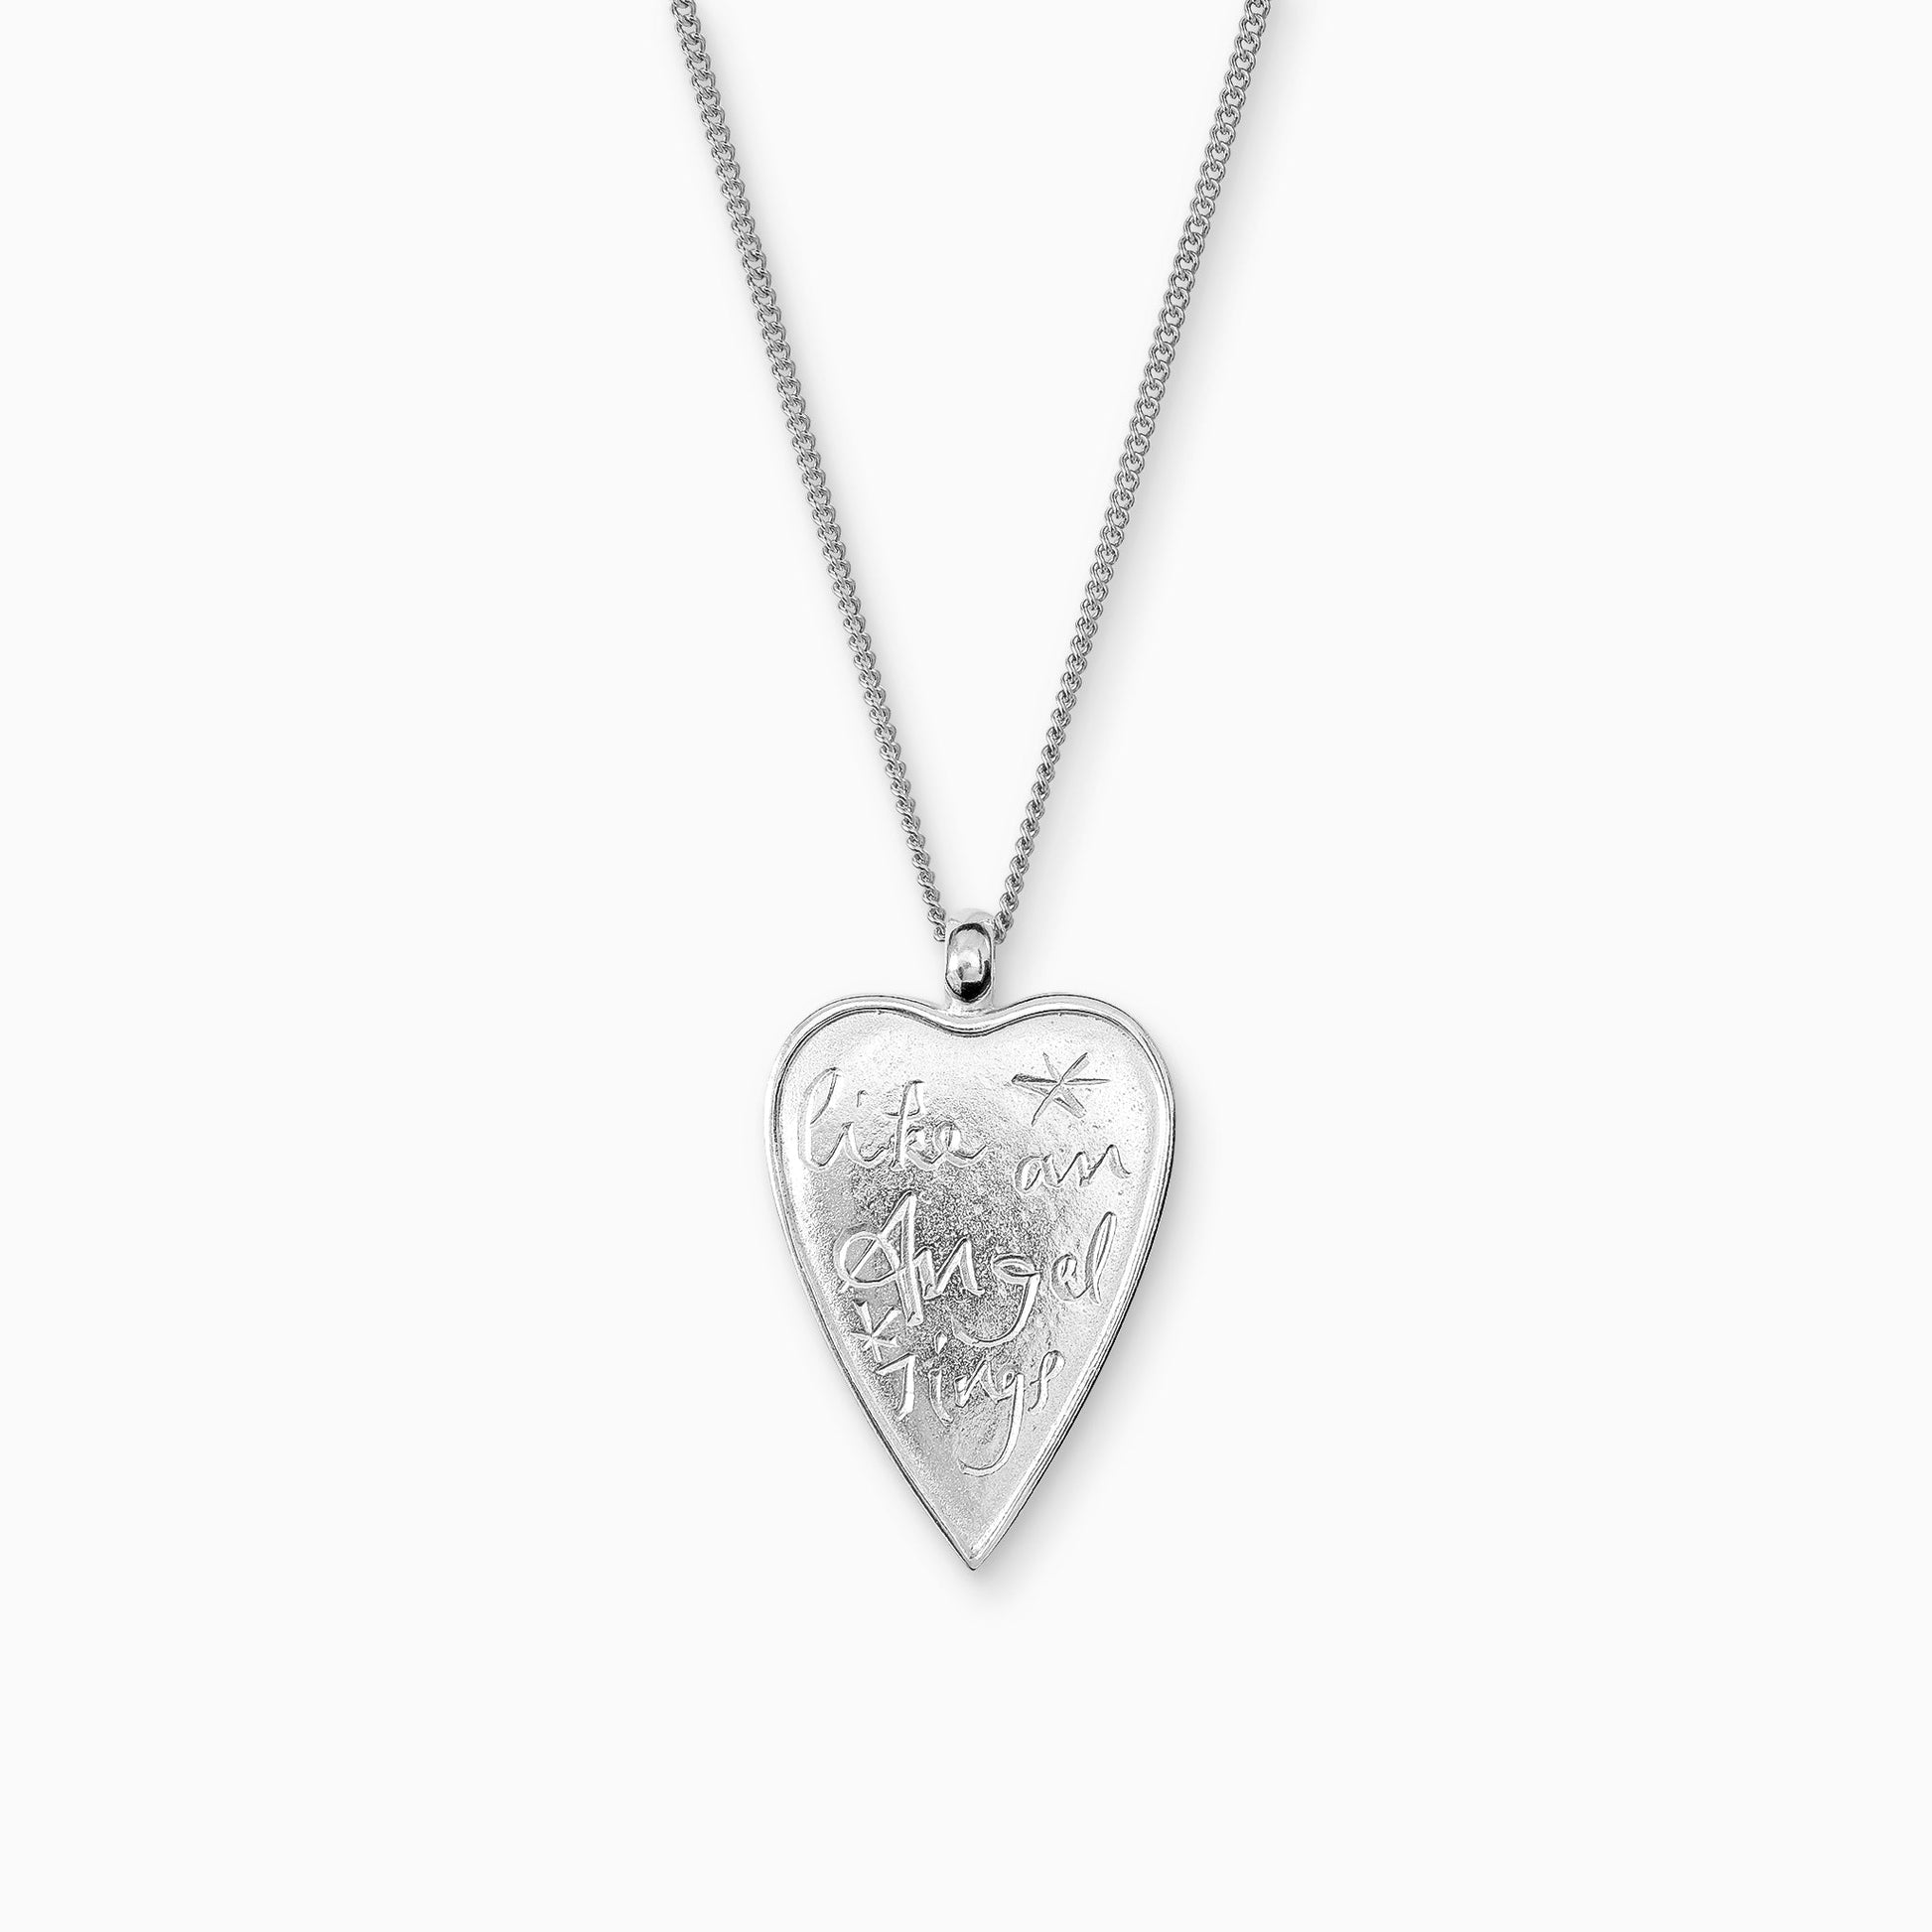 Recycled Silver teardrop shaped charm, 38cm x 24mm on a 45cm fine curb chain.  Like and Angel Sings is inscribed in a handwritten script on the front of the pendant.